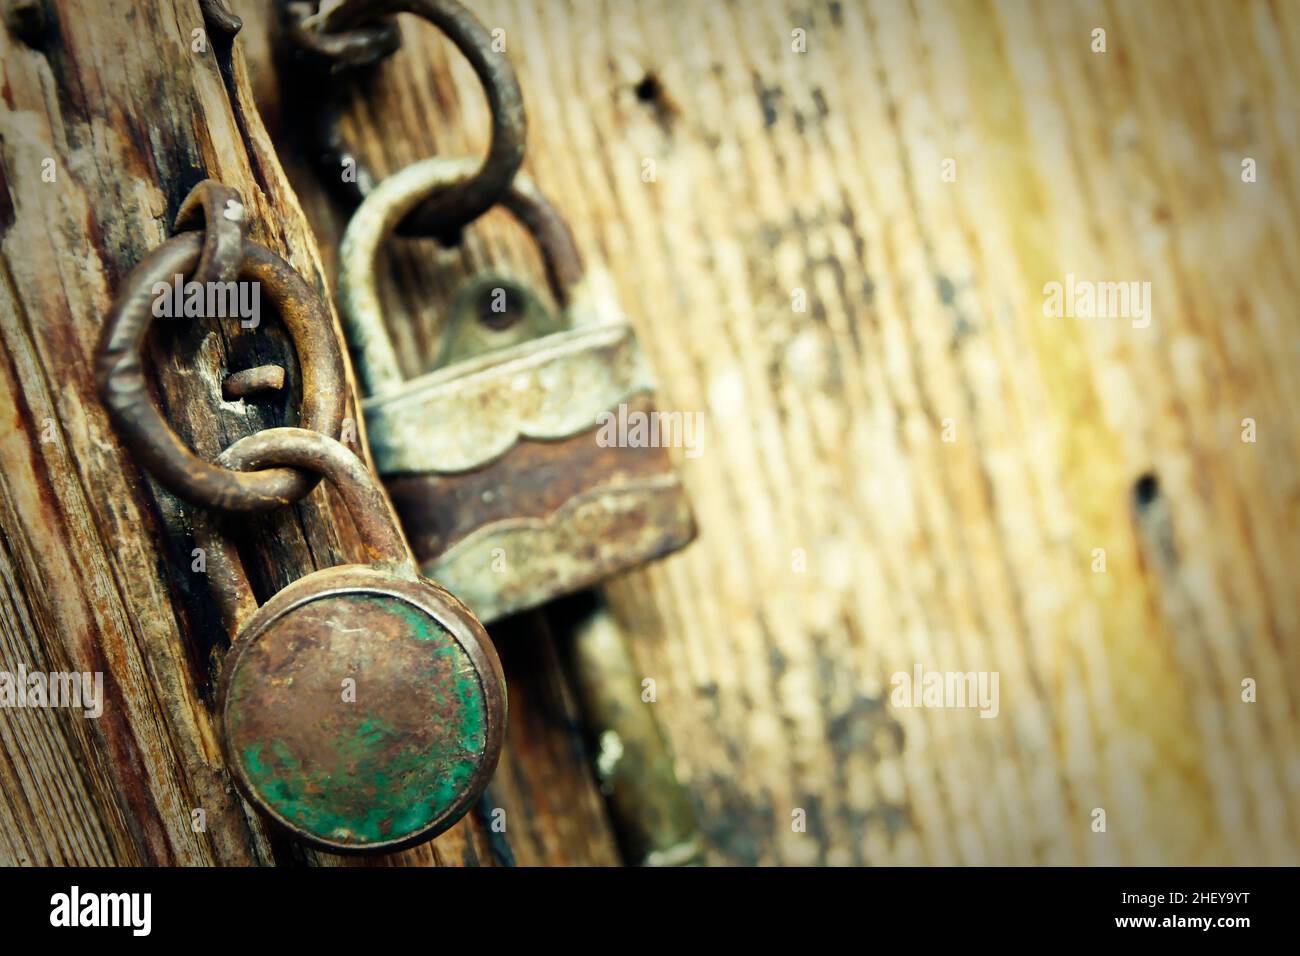 Two old padlocks on an old wooden door Stock Photo